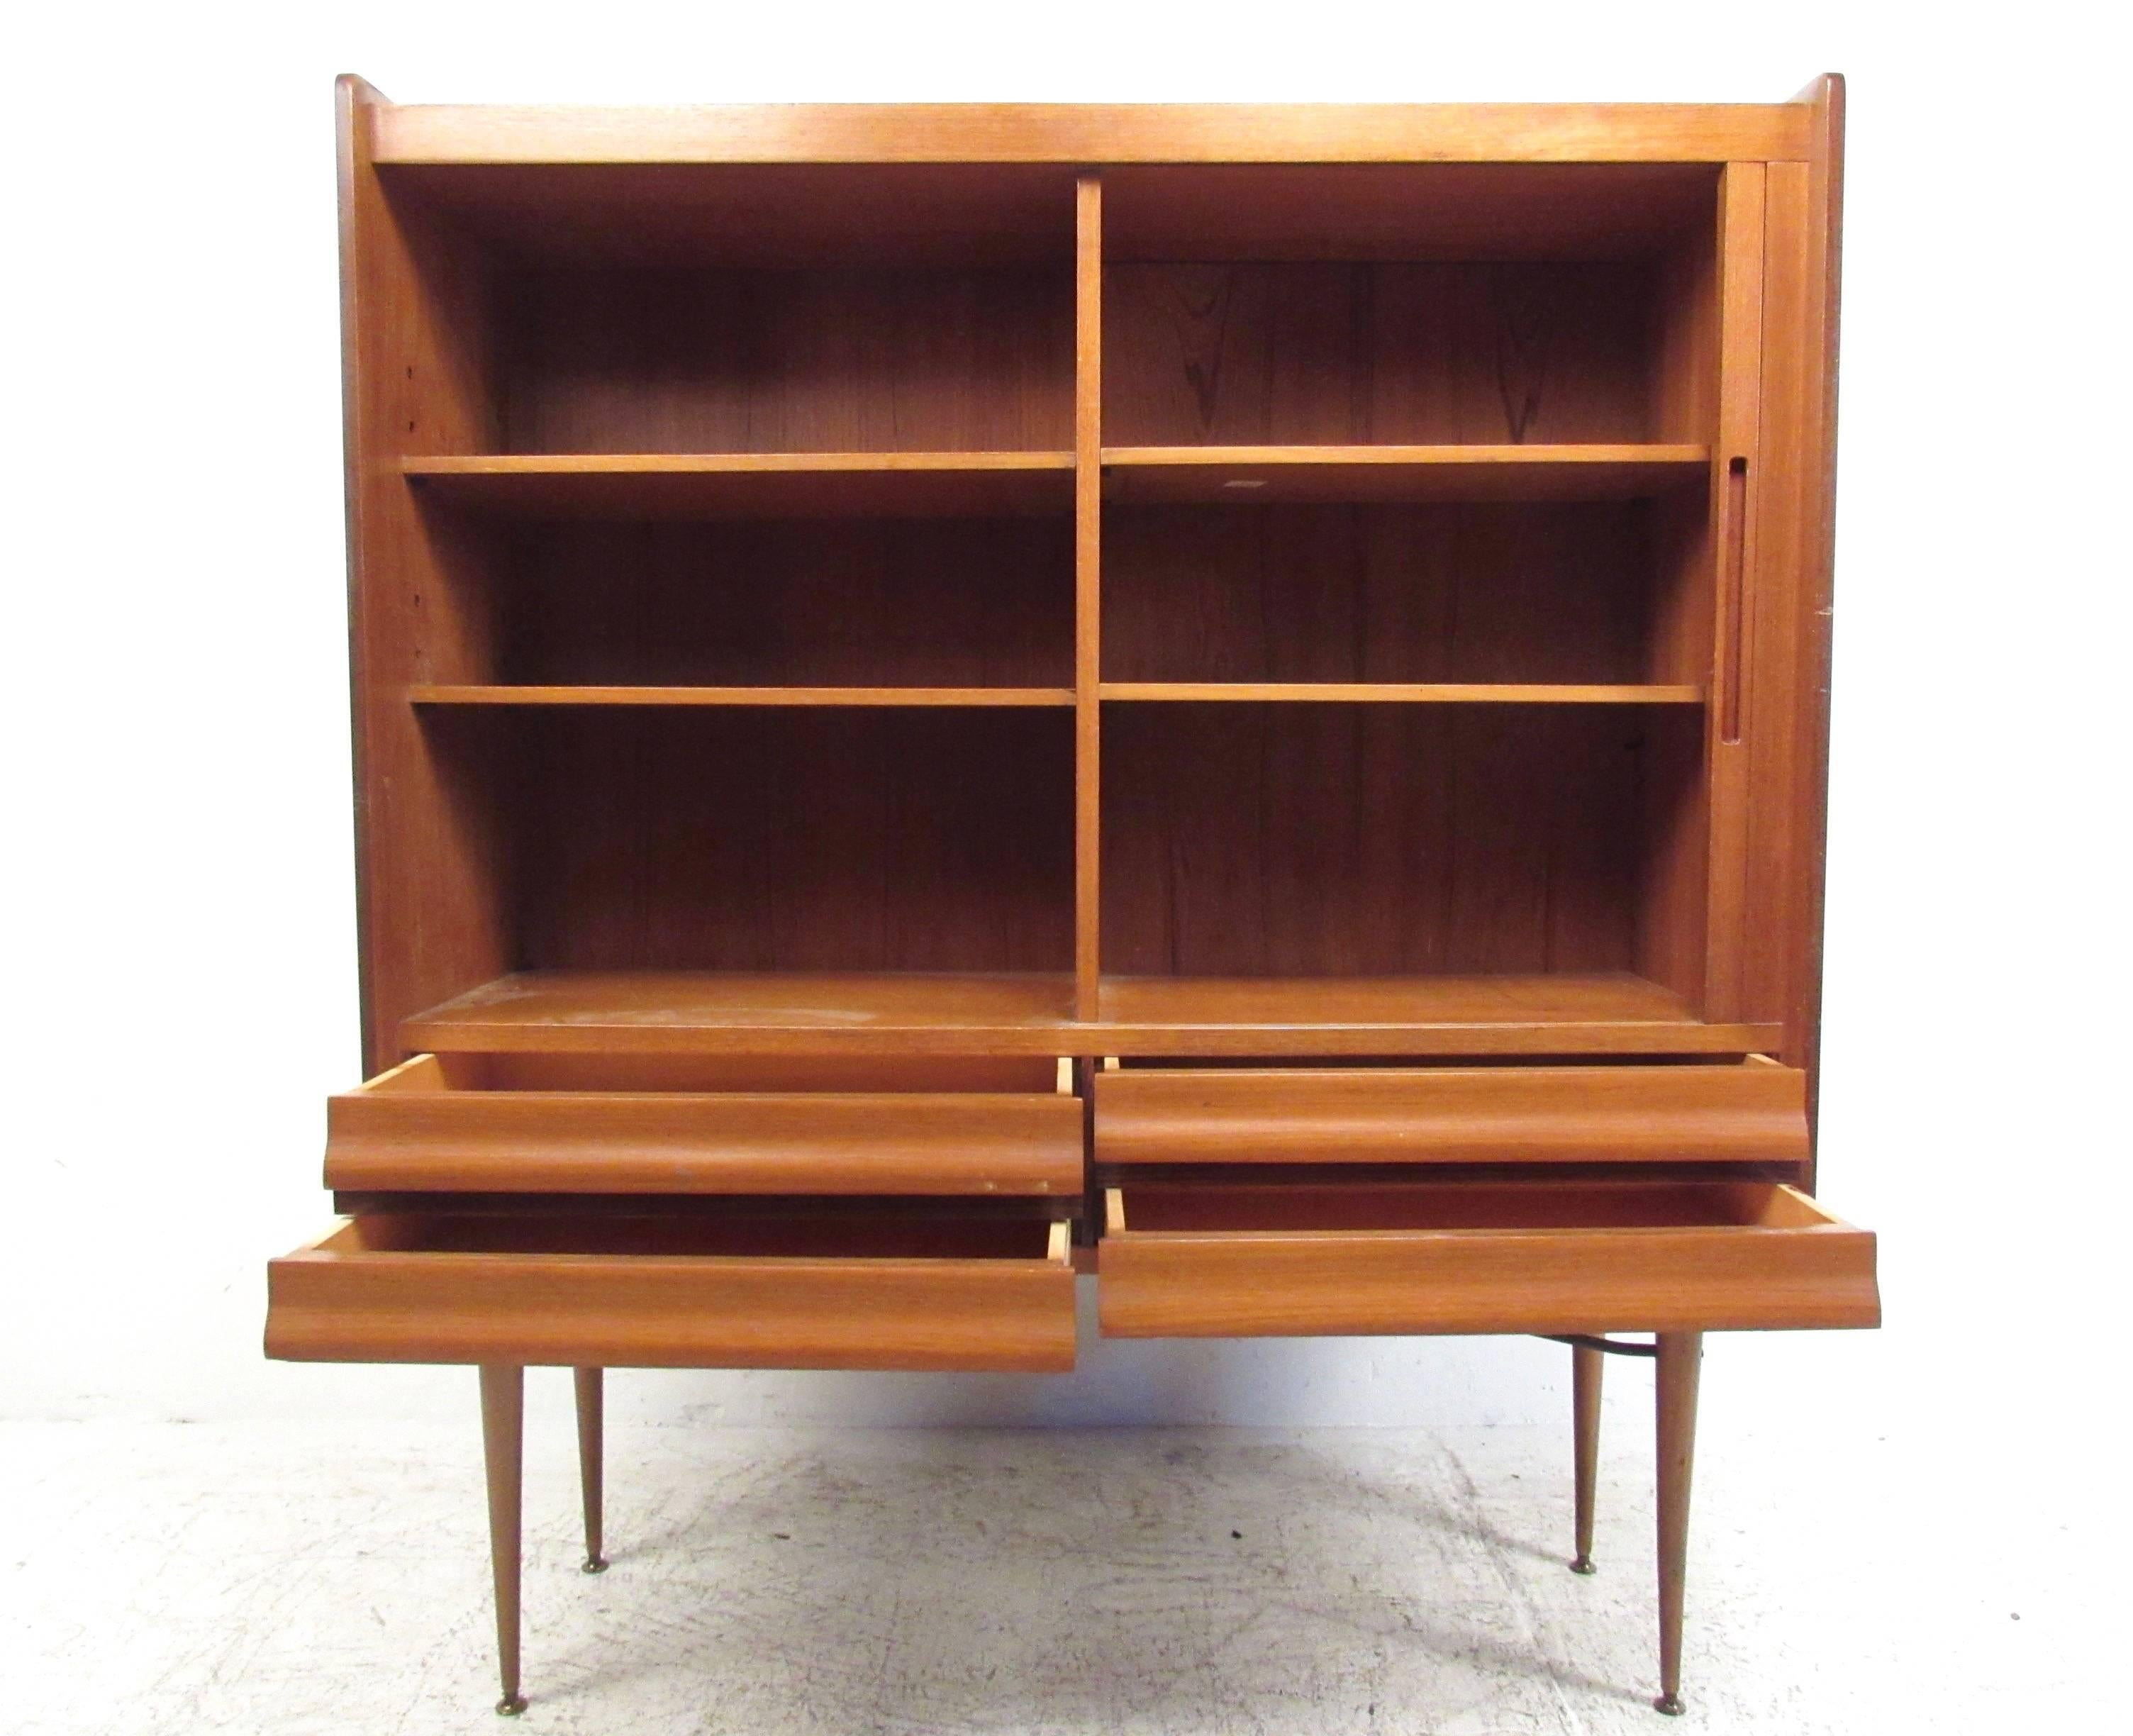 This tall vintage cabinet features unique Scandinavian style with plenty of storage in side-by-side arrangement. Mixed wood design combines mahogany, teak, and rosewood for a beautiful end product. Open shelves for display are paired with a stylish